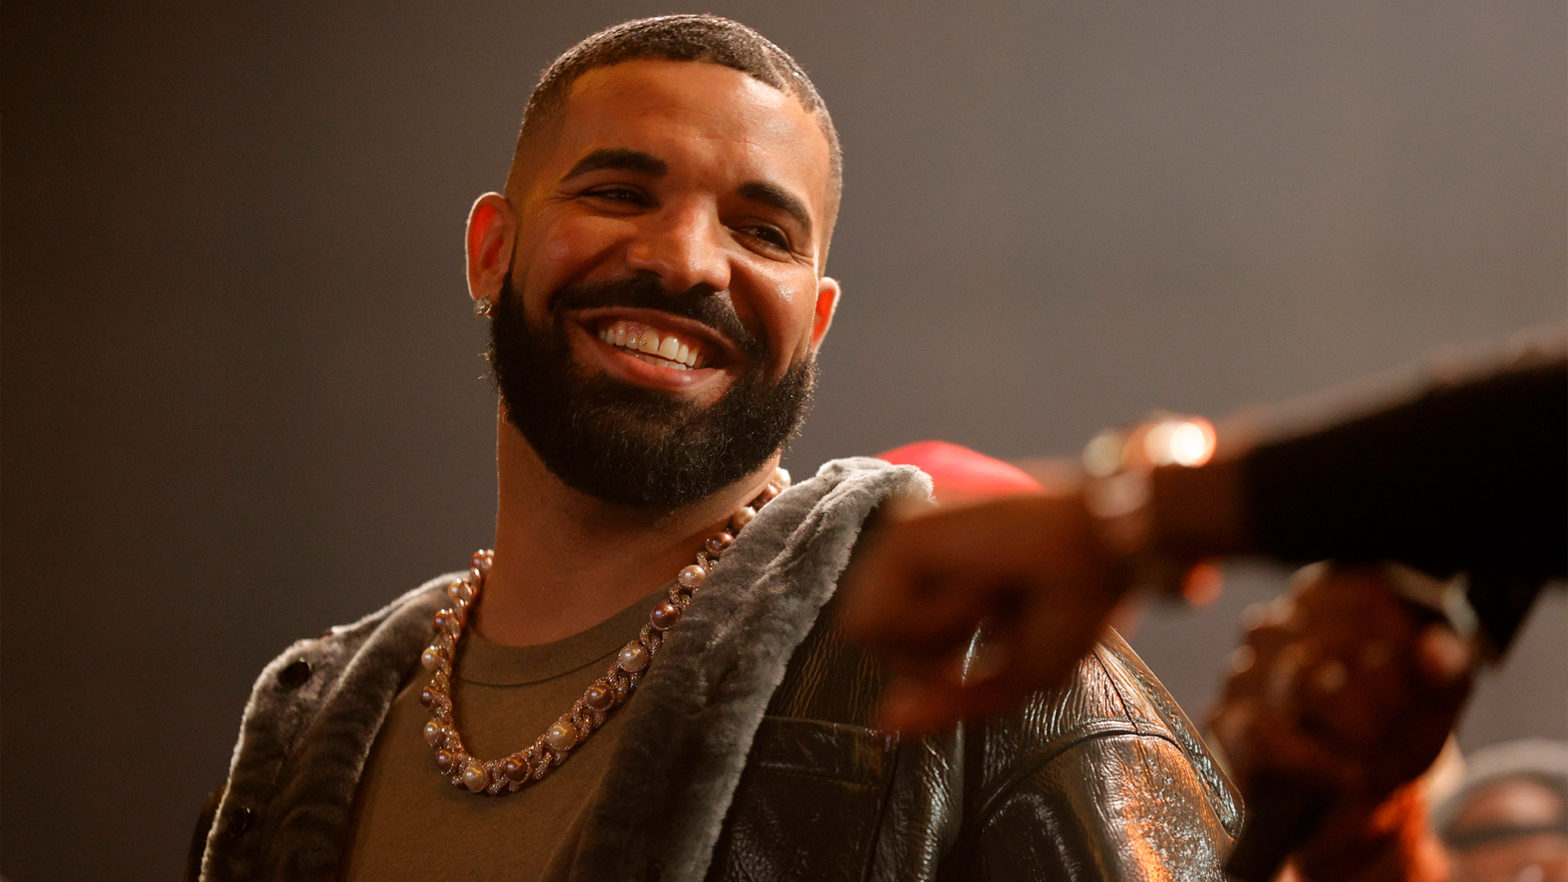 Drake Ends UFC Betting Curse With $1M Win From Israel Adesanya's Fight Via Online Gambling Company Stake